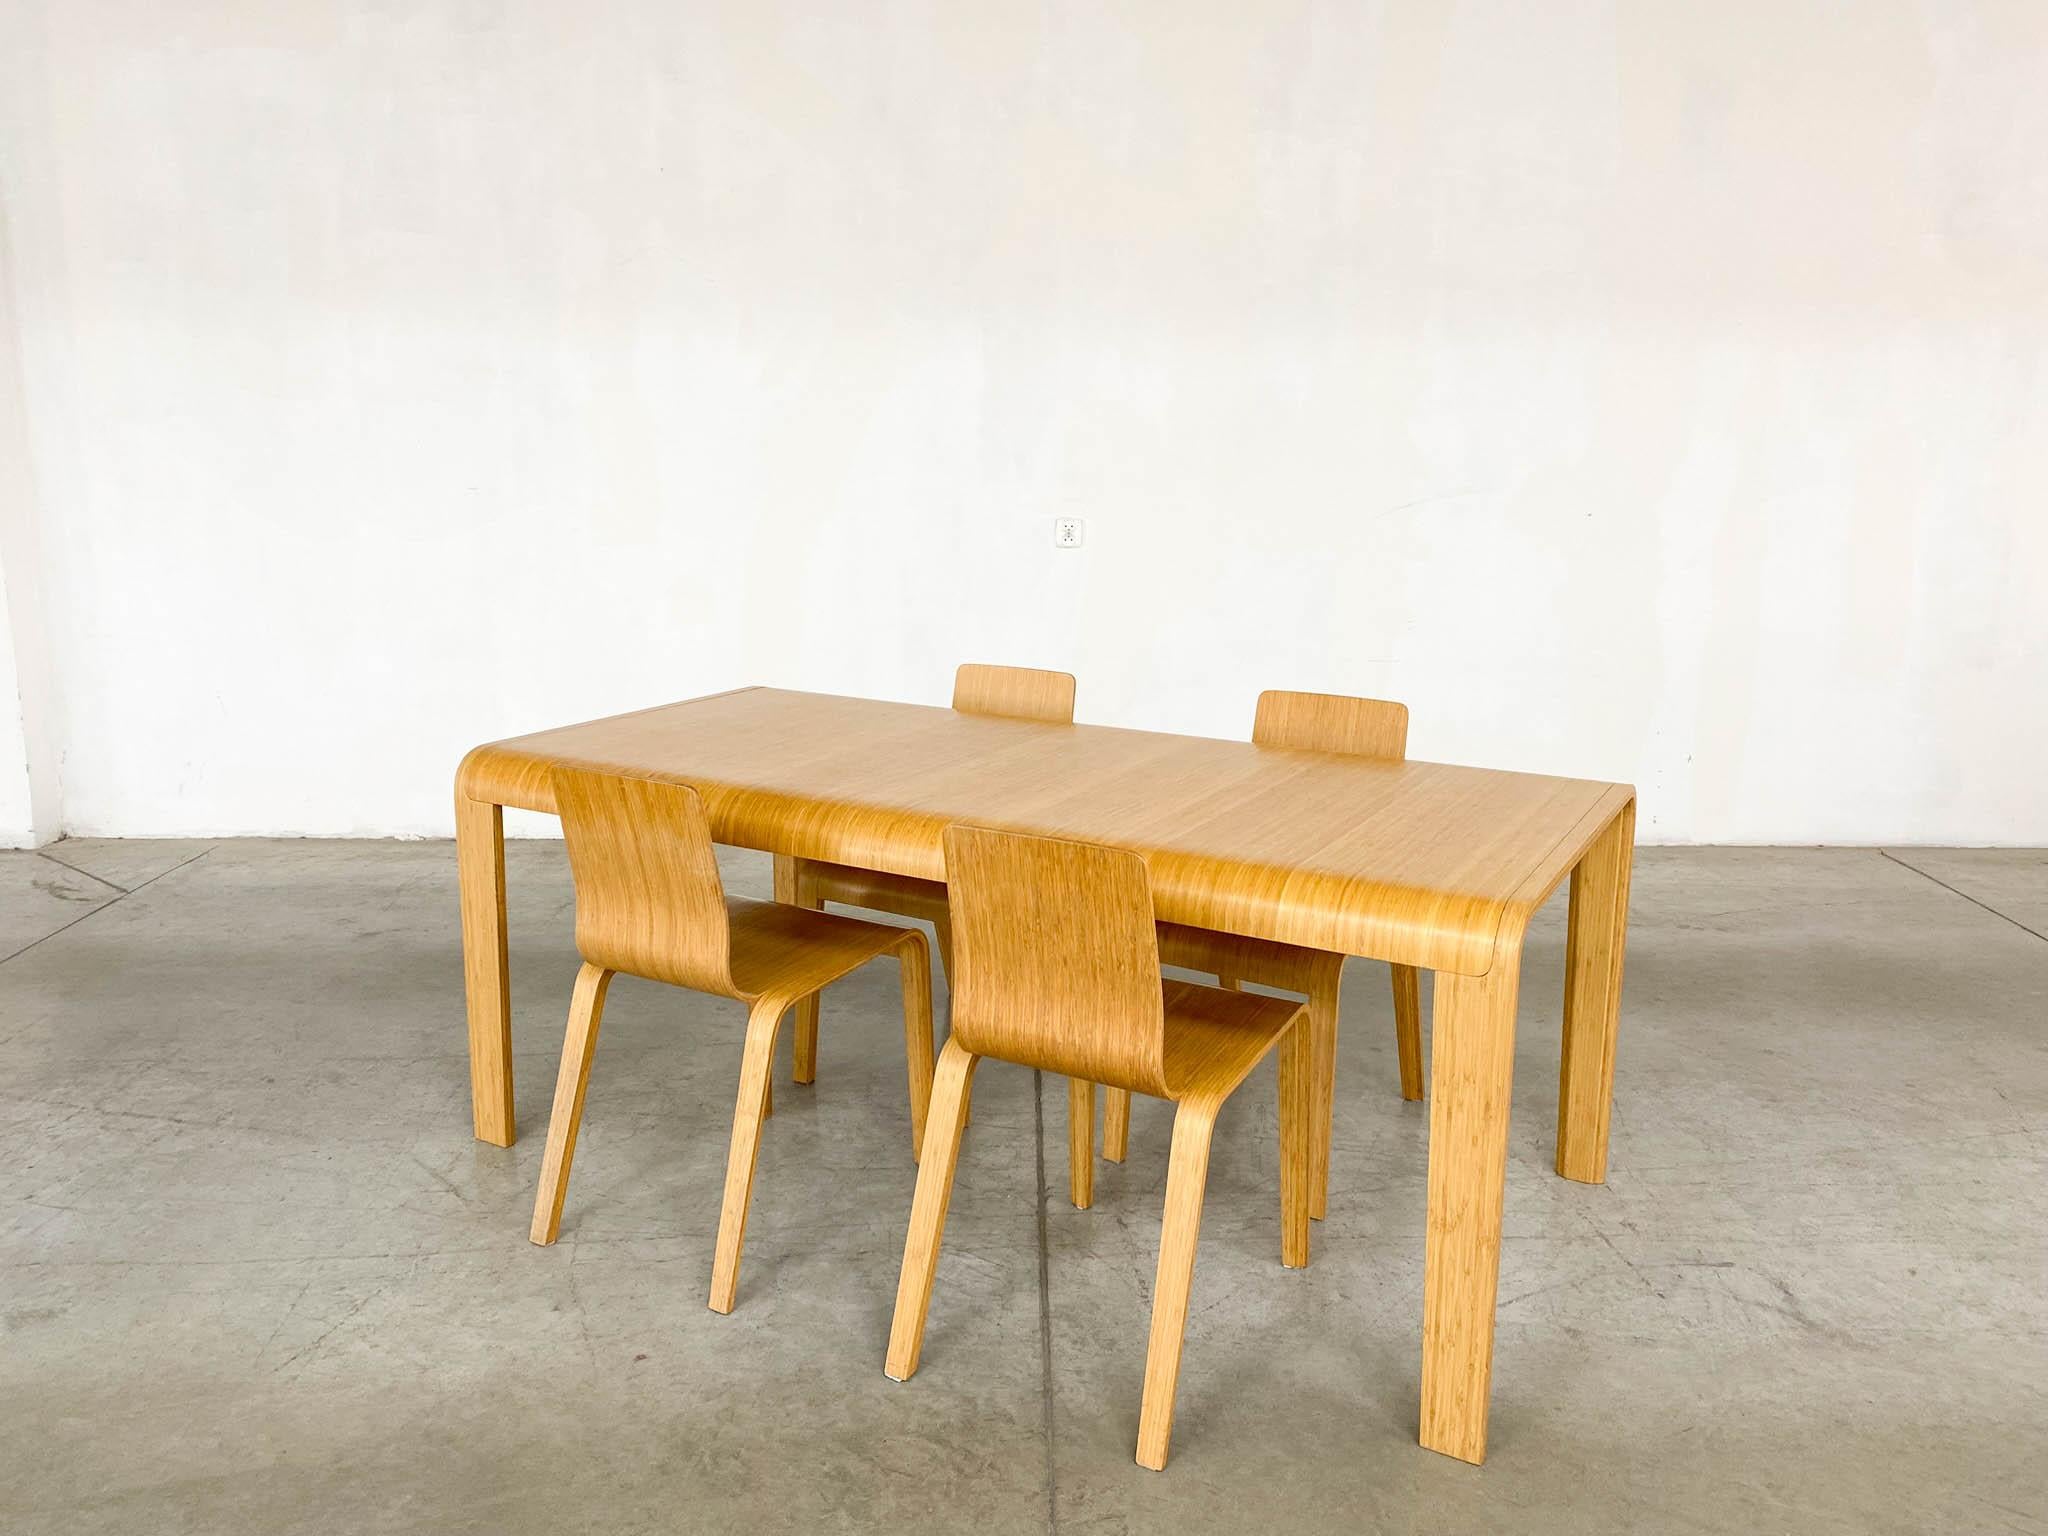 Bamboo Dining Set Table and Chairs by Henrik Tjaerby for Artek Studio, Set of 5 For Sale 3